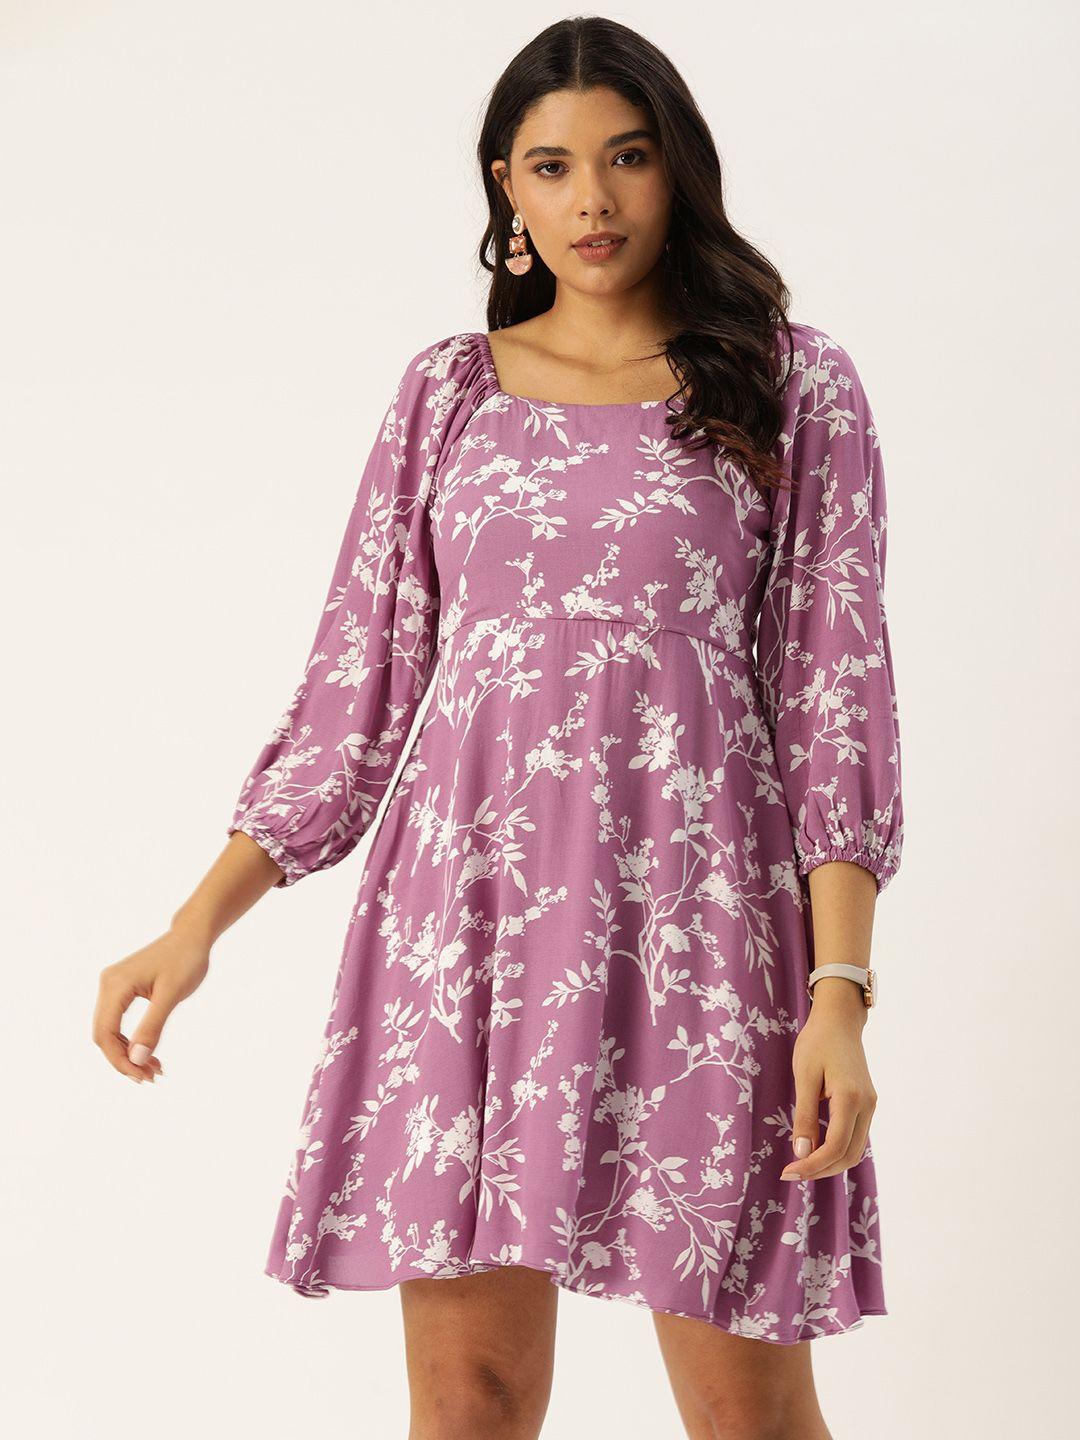 and purple & white floral printed fit and flare dress